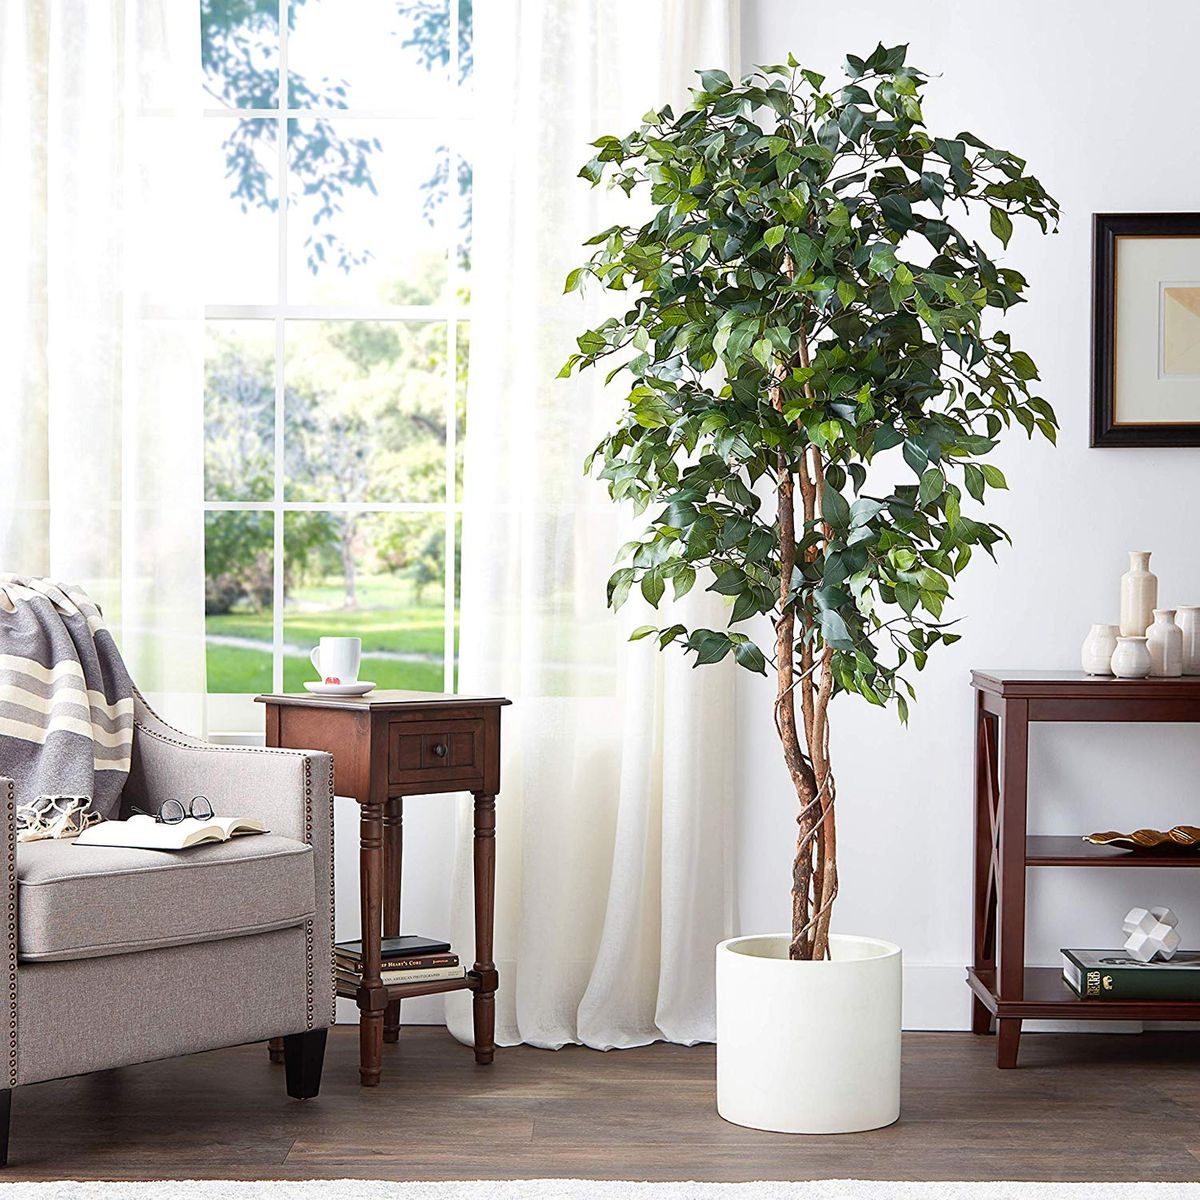 6' LARGE Artificial Ficus Silk Tree Fake Plant Potted Decor Yard Outdoor Indoor 